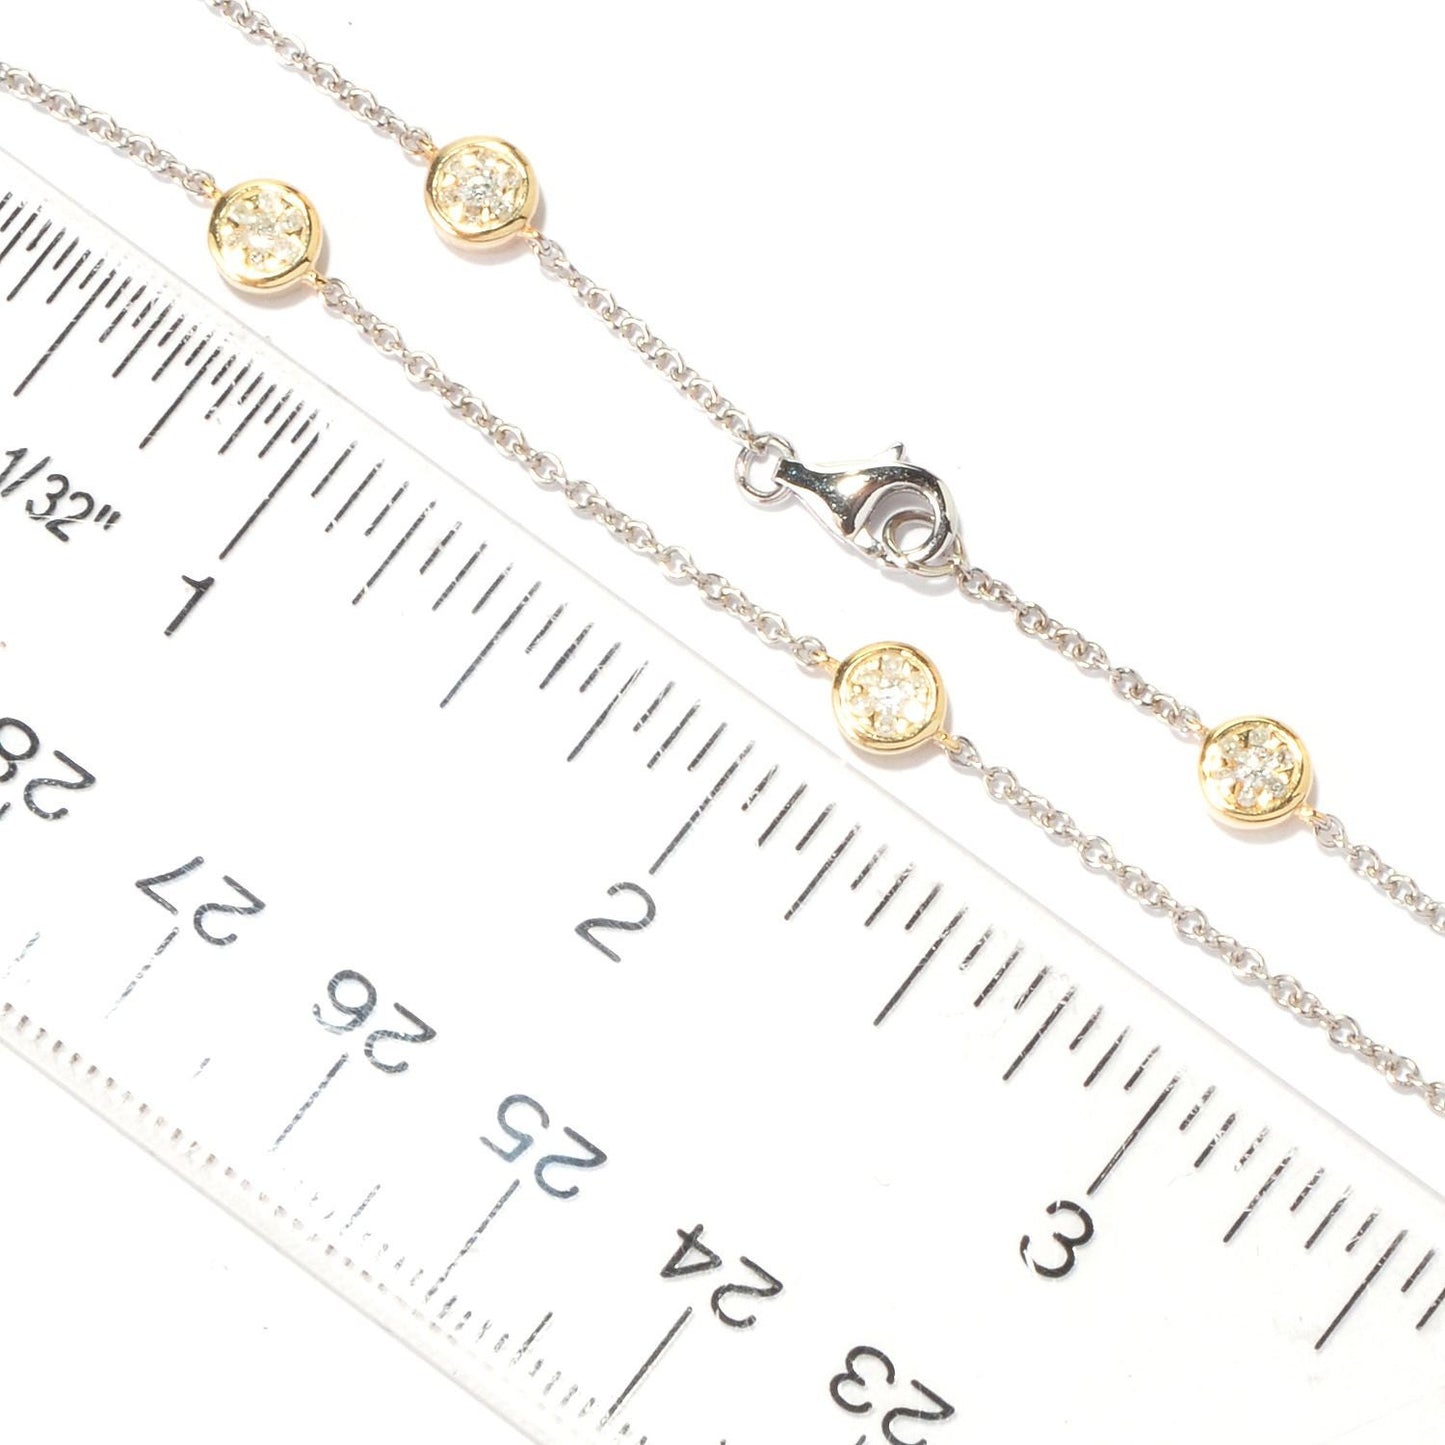 Pinctore Yellow Gold over Silver 1.51ctw Diamond Chain Necklace 36.00"L